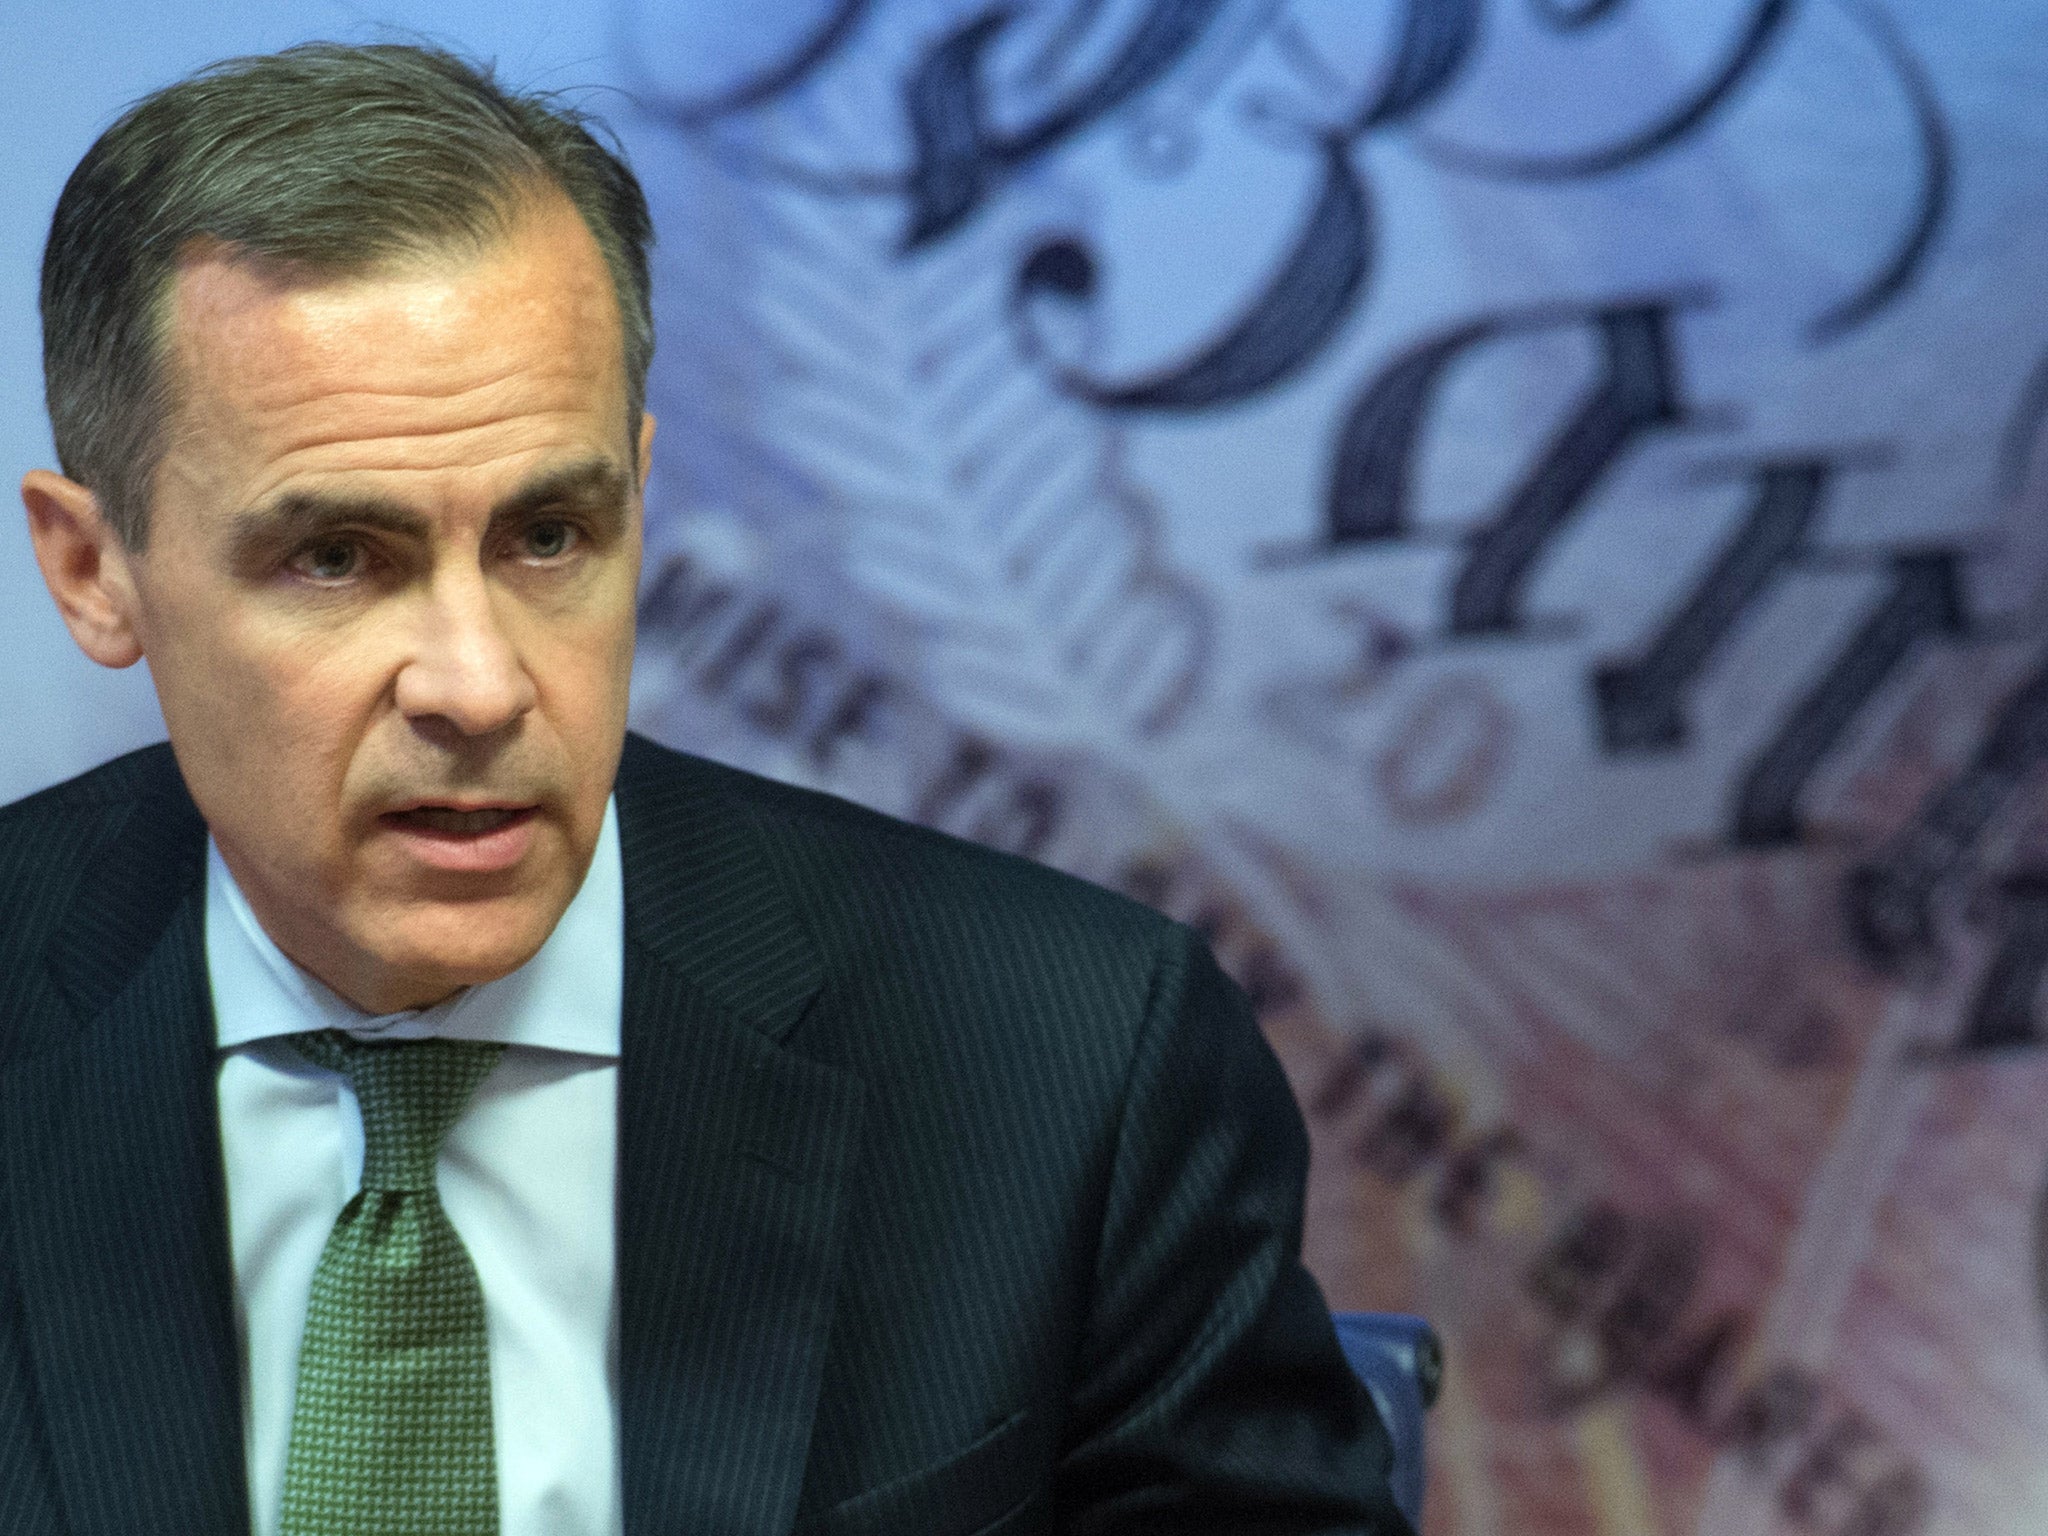 Governor of the Bank of England Mark Carney may decide to increase interest rates if unemployment continues to drop